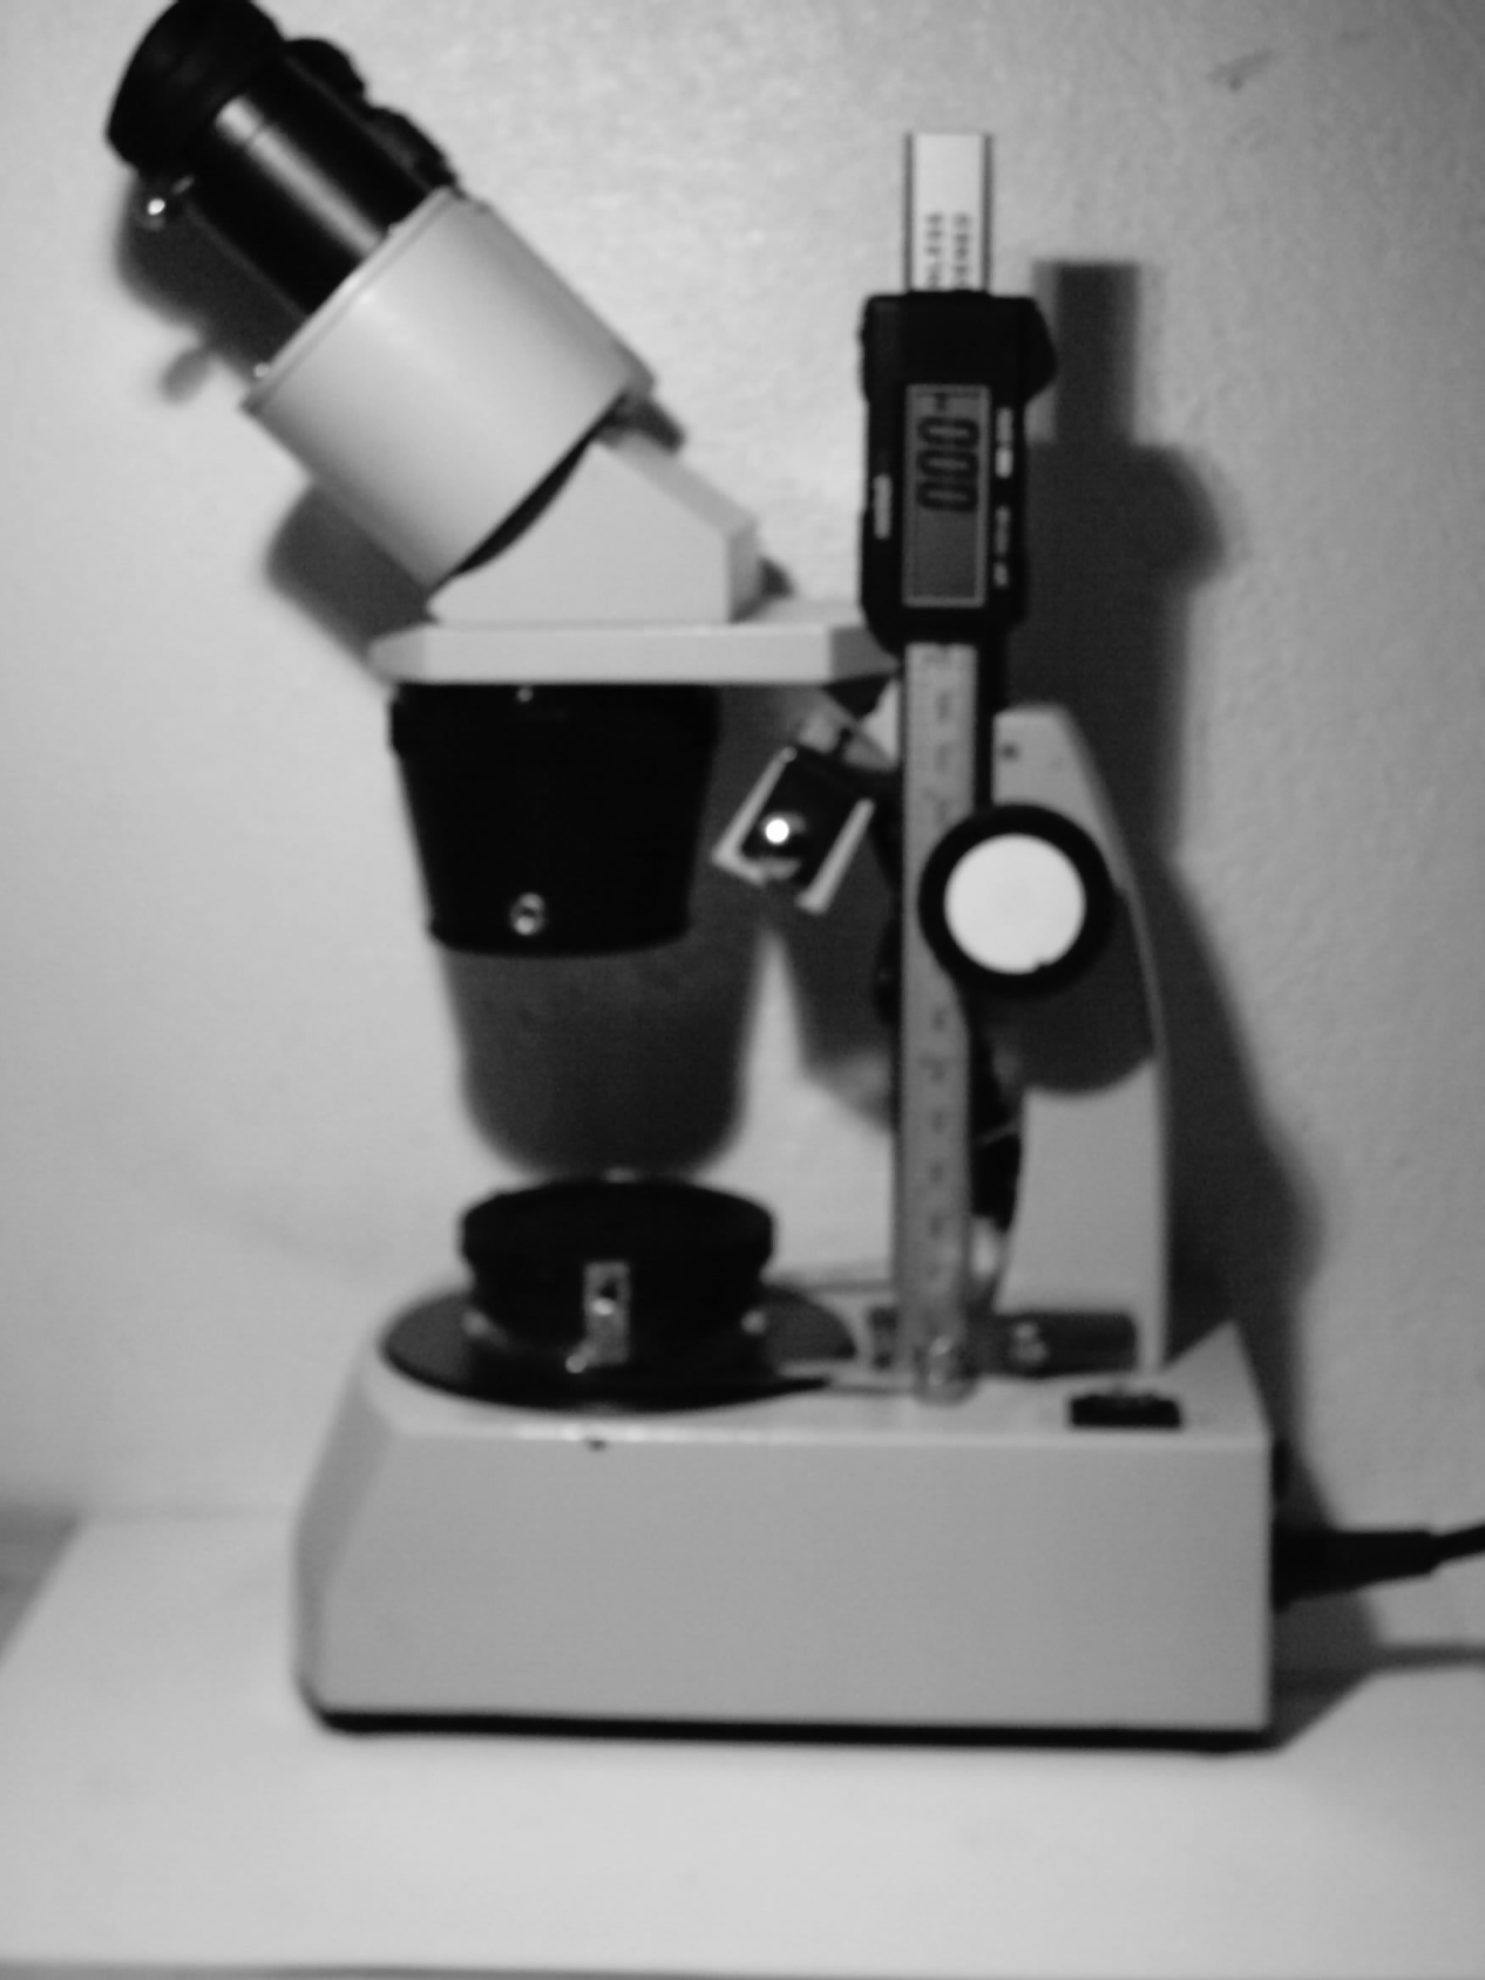 A microscope adapted for measuring OTL gemstone RIs.